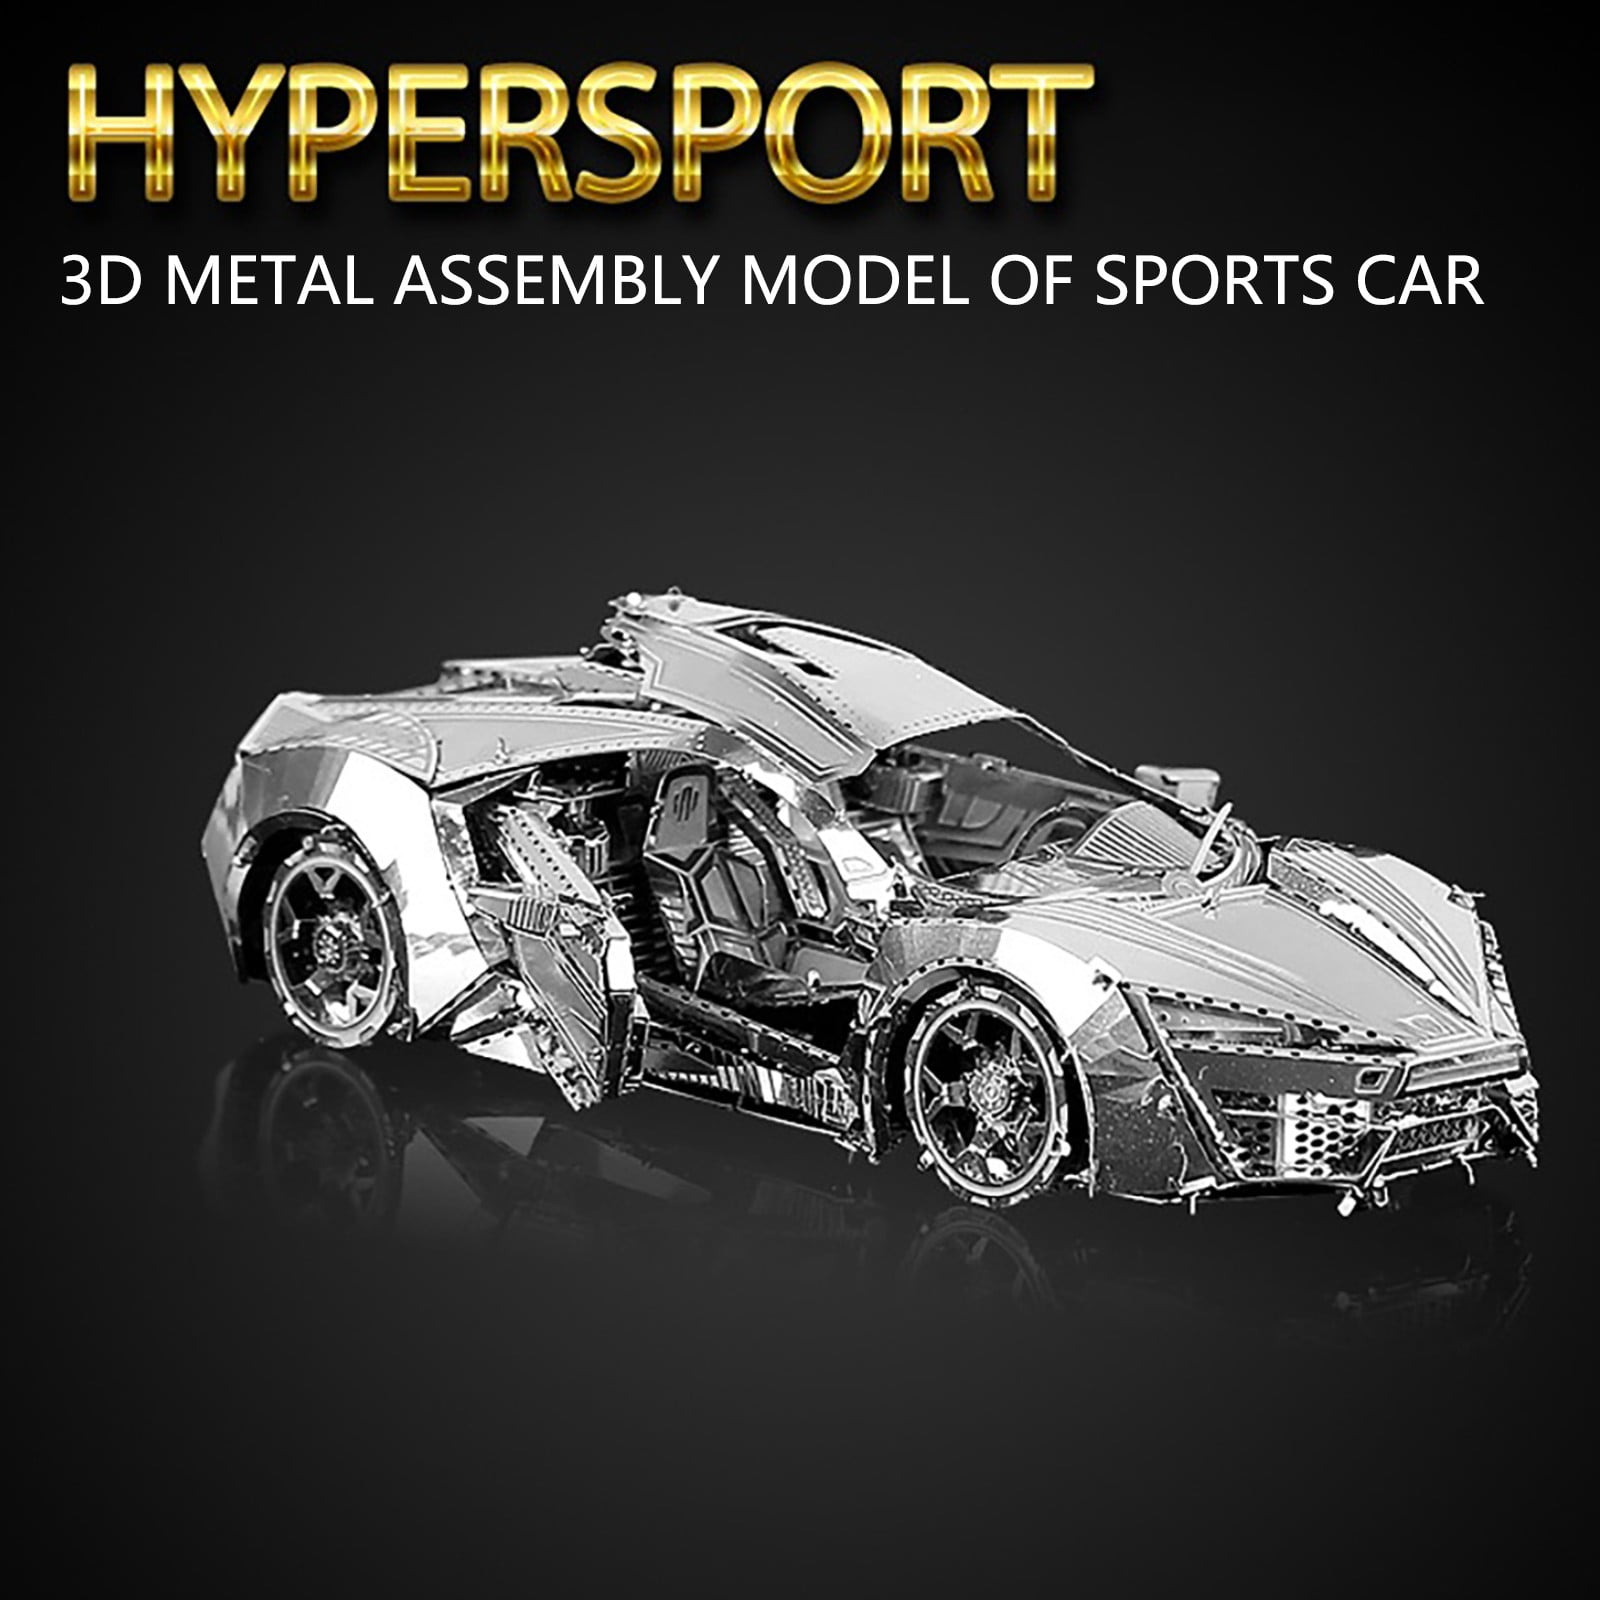 Time for Machine Mechanical Metal 3D Puzzle TINY SPORTCAR Model assembly 